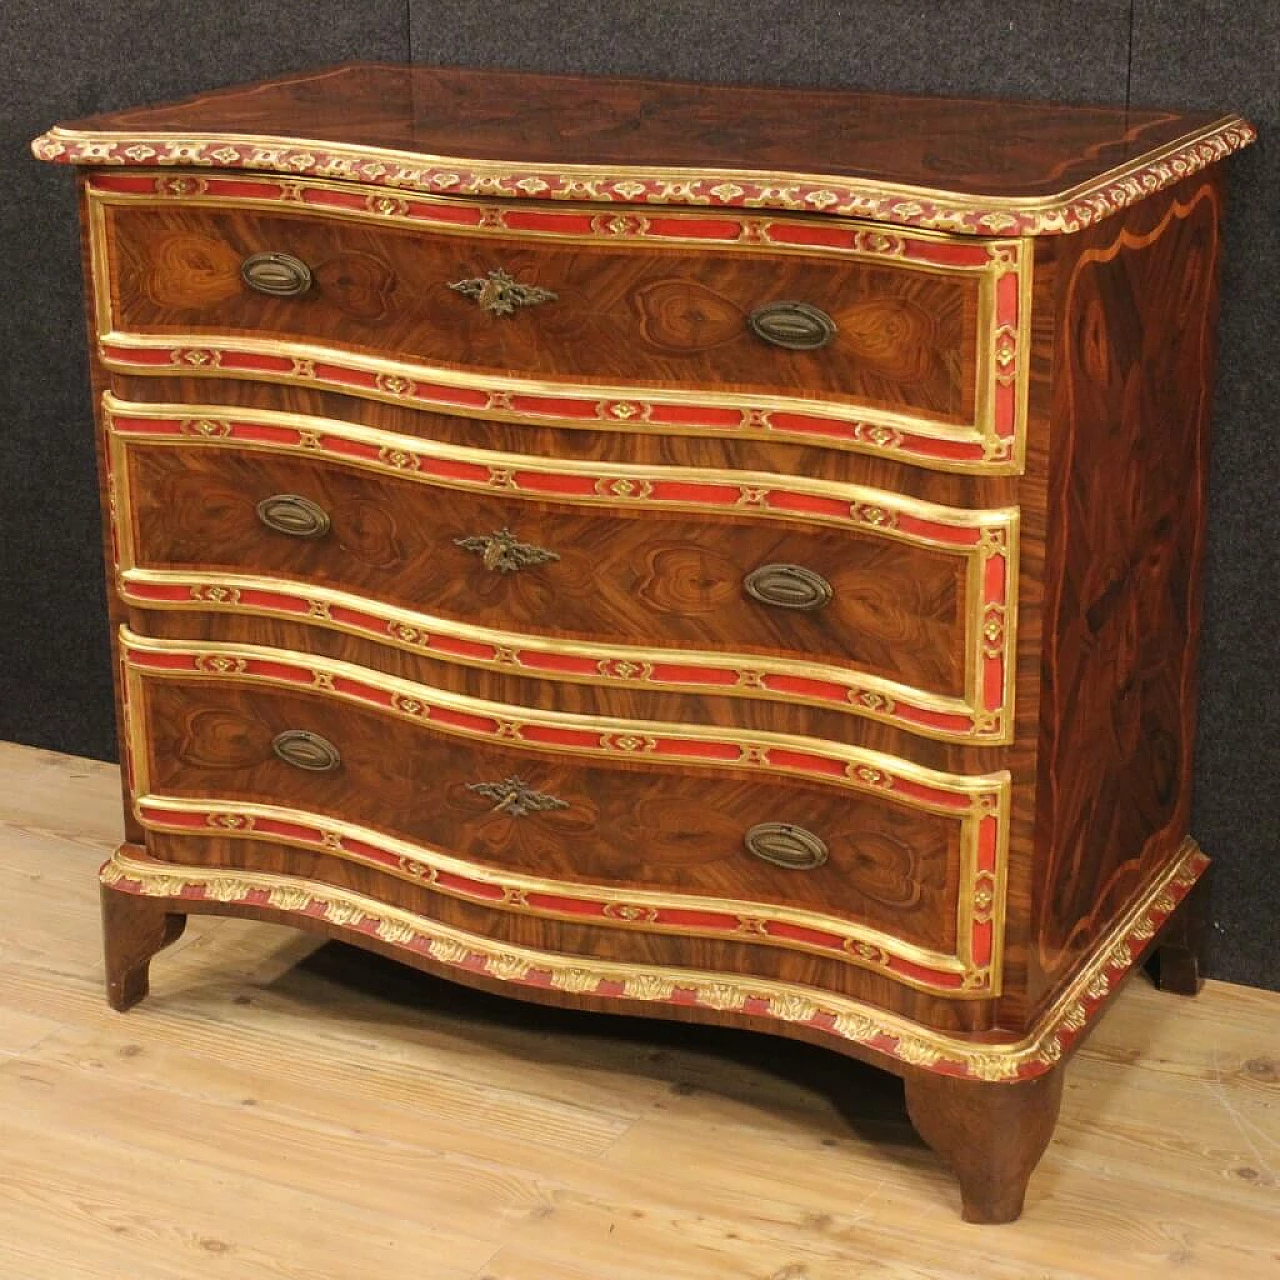 Genoese inlaid, lacquered and gilded wood dresser 6